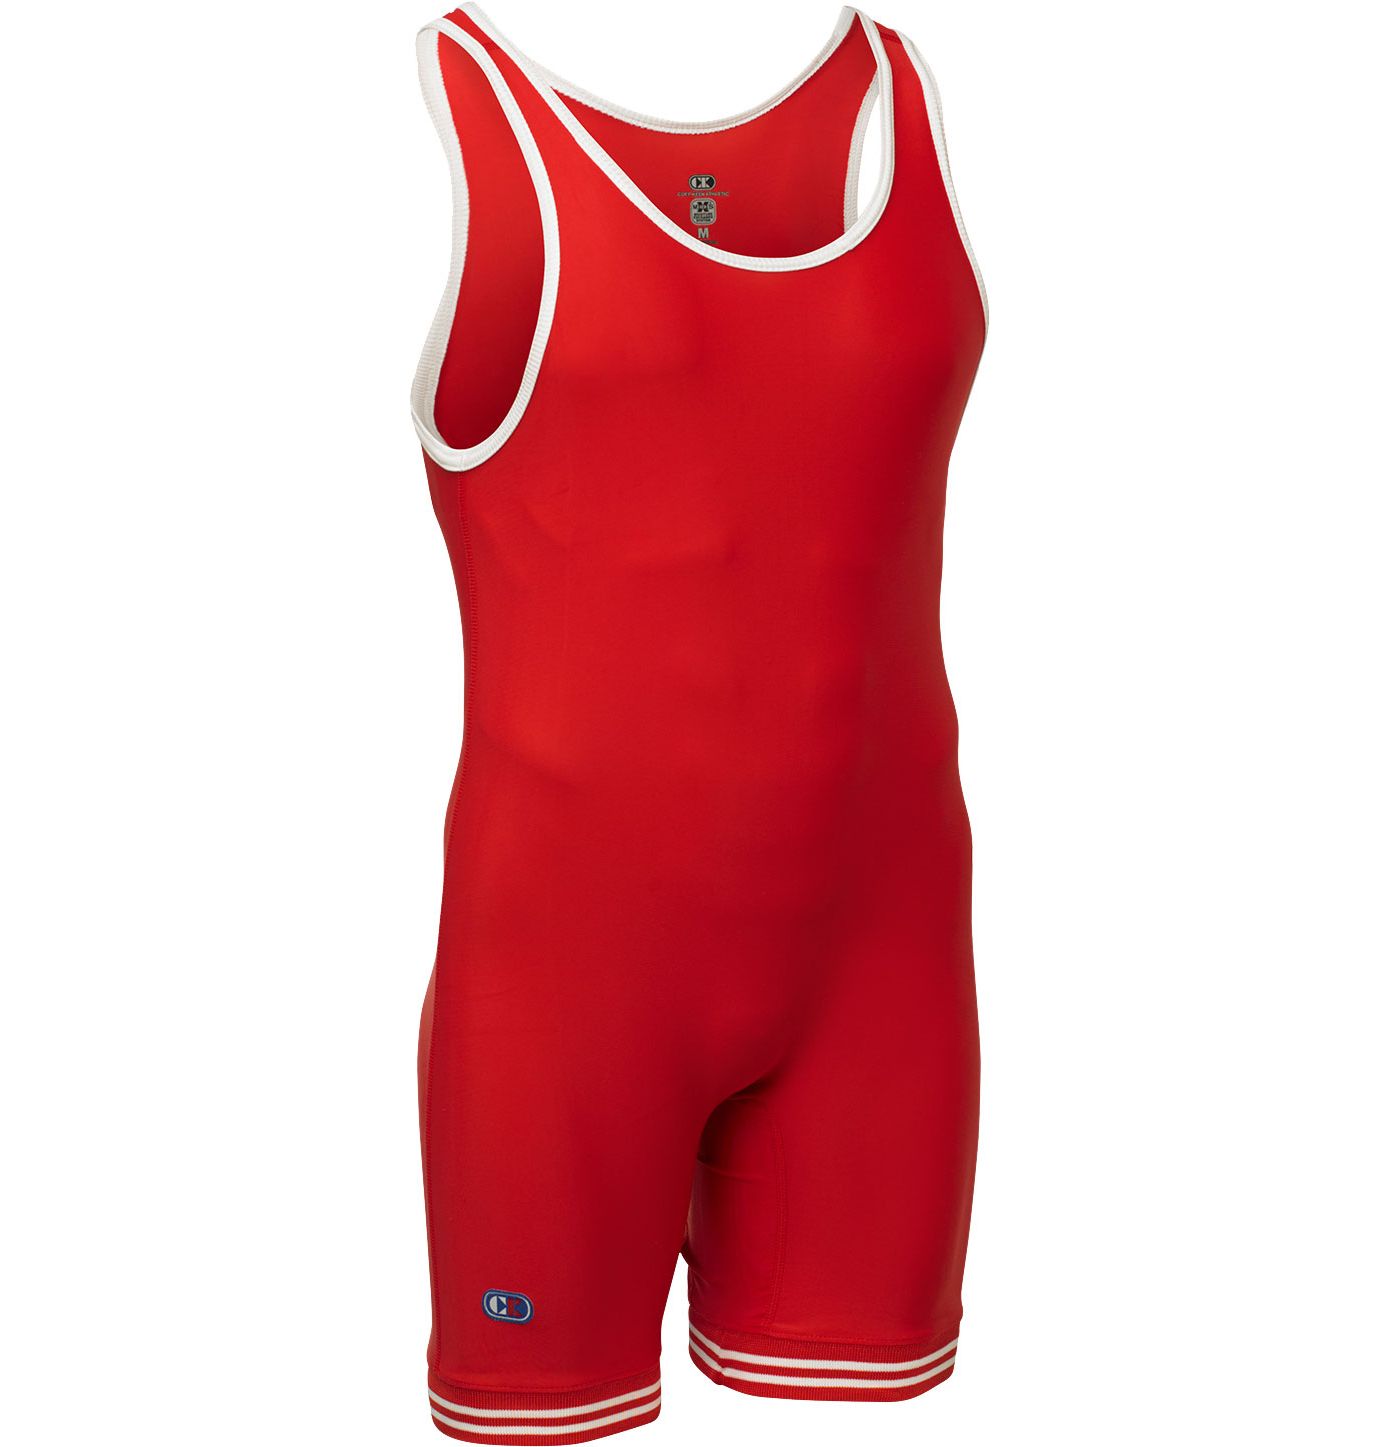 Cliff Keen The Collegiate Compression Gear Wrestling Singlet | DICK'S ...